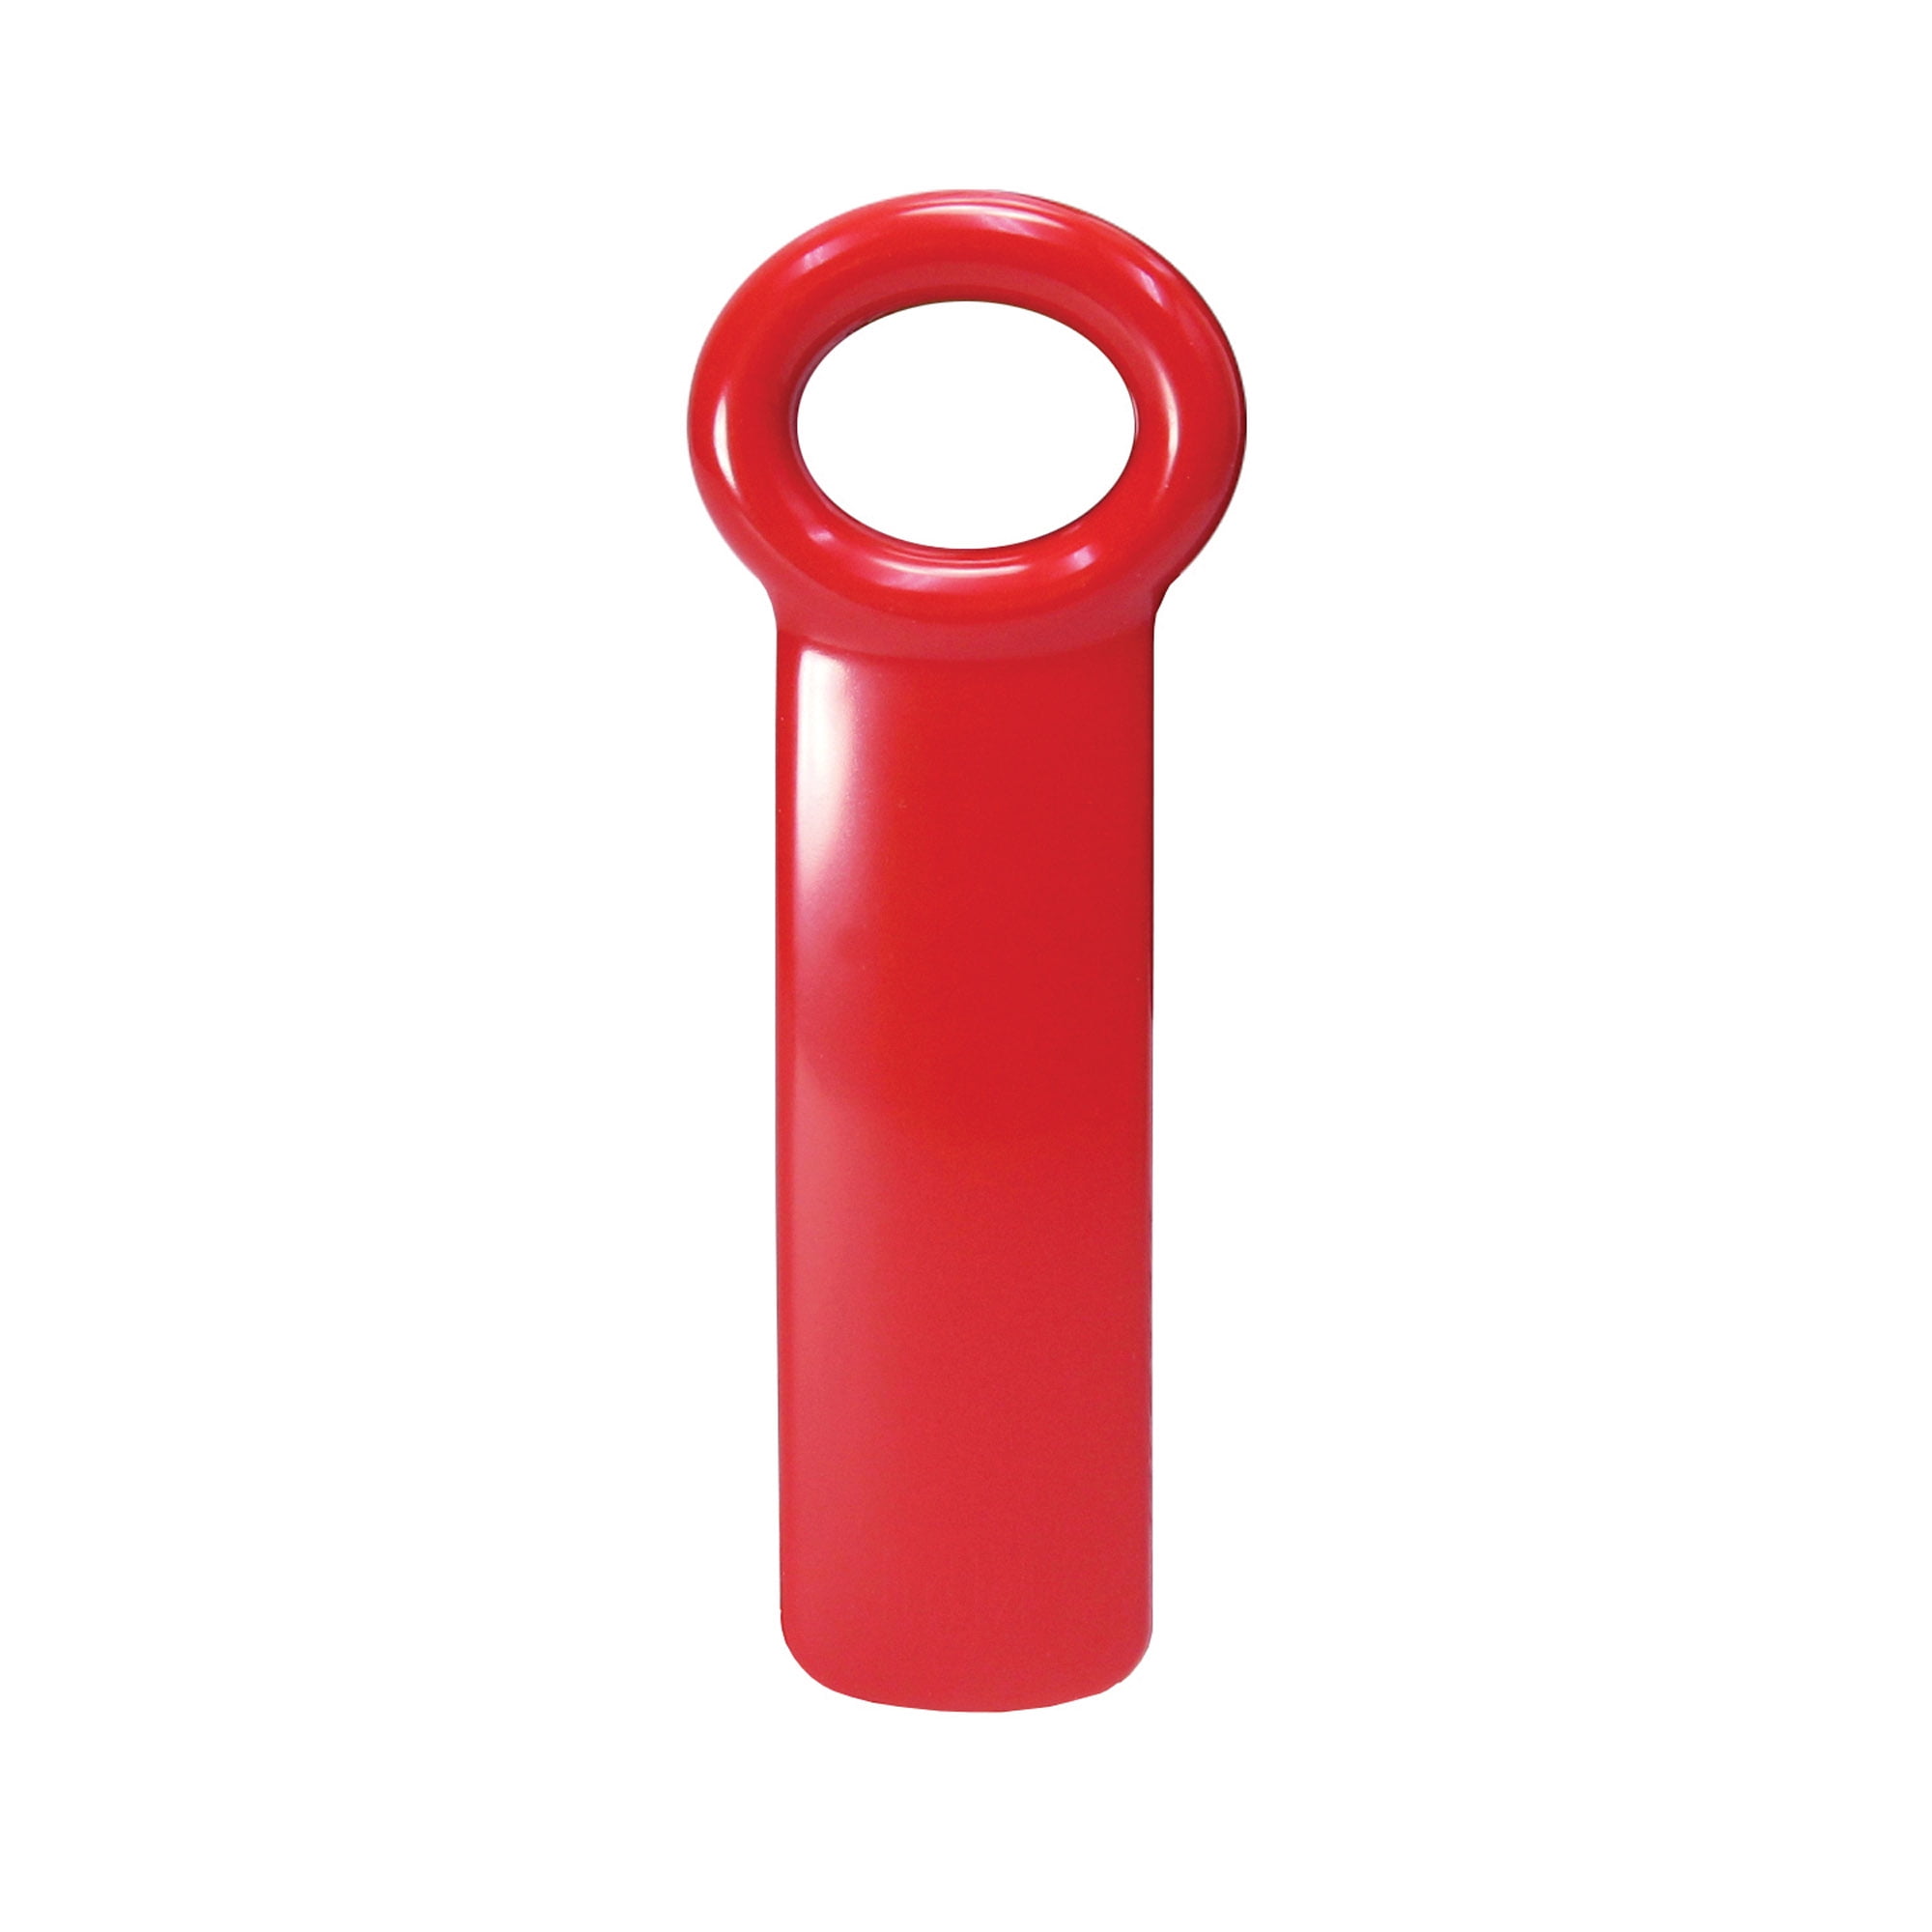 Brix Original Easy Jar Key Opener, Great for Kids and Arthritis and Carpal  Tunnel Sufferers, Red, 5.62-Inches 